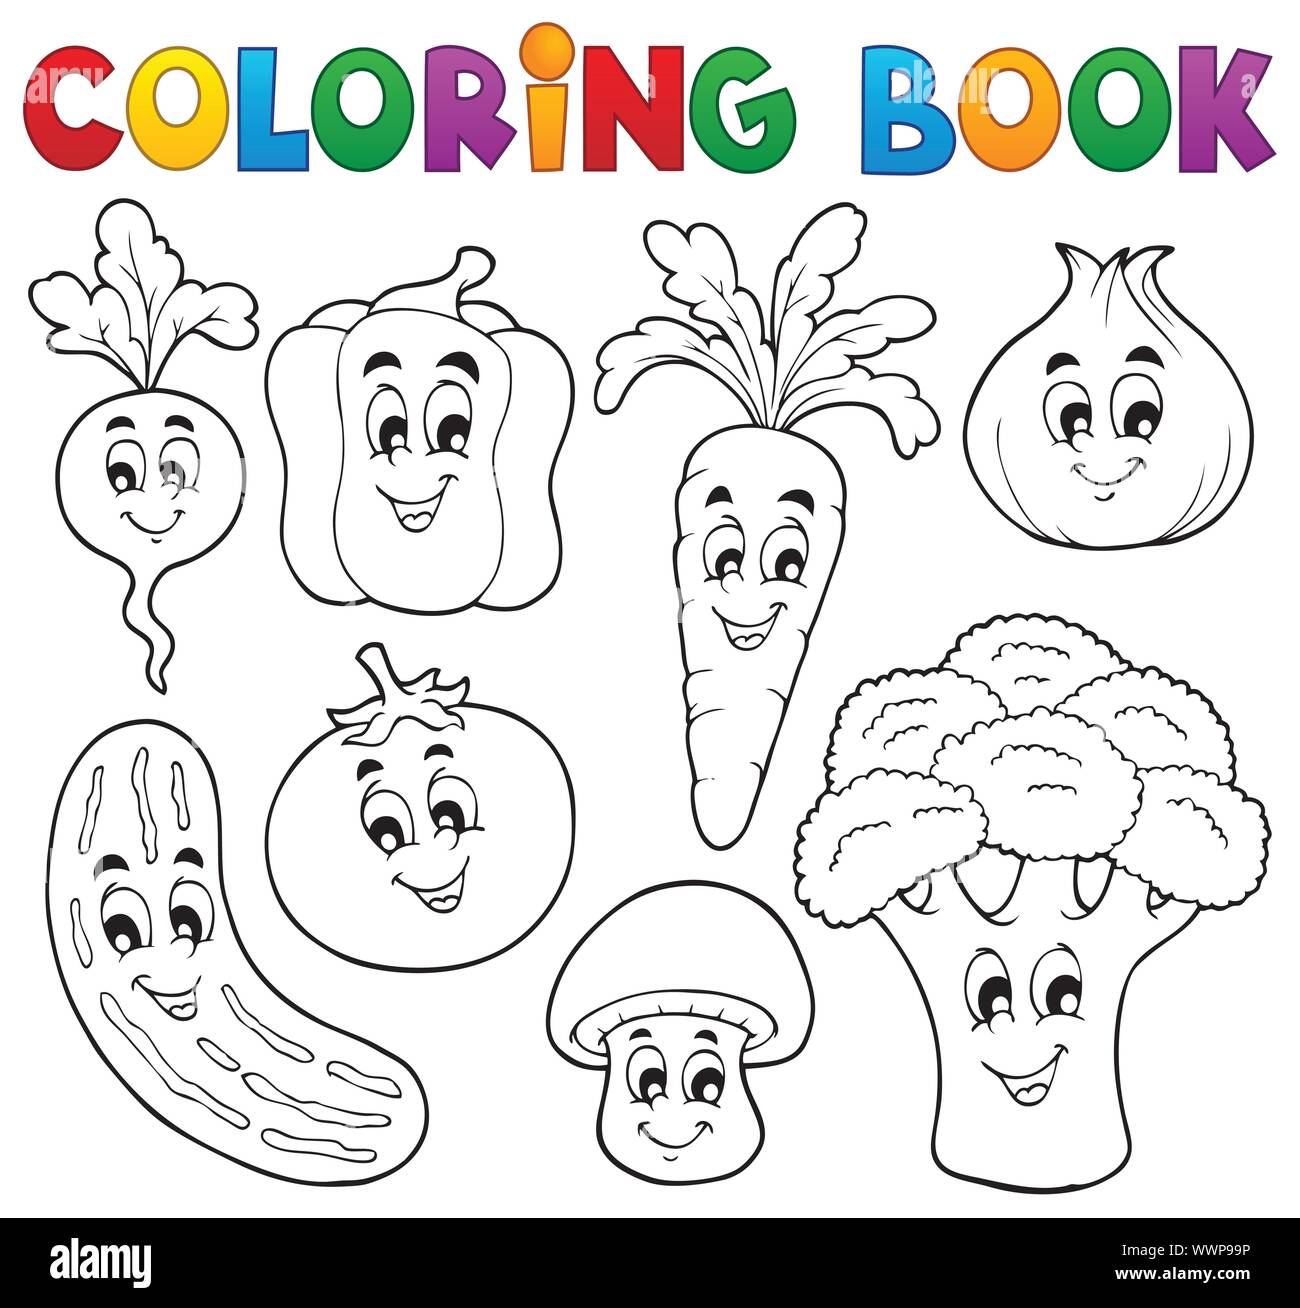 Coloring book vegetable theme 1 Stock Vector